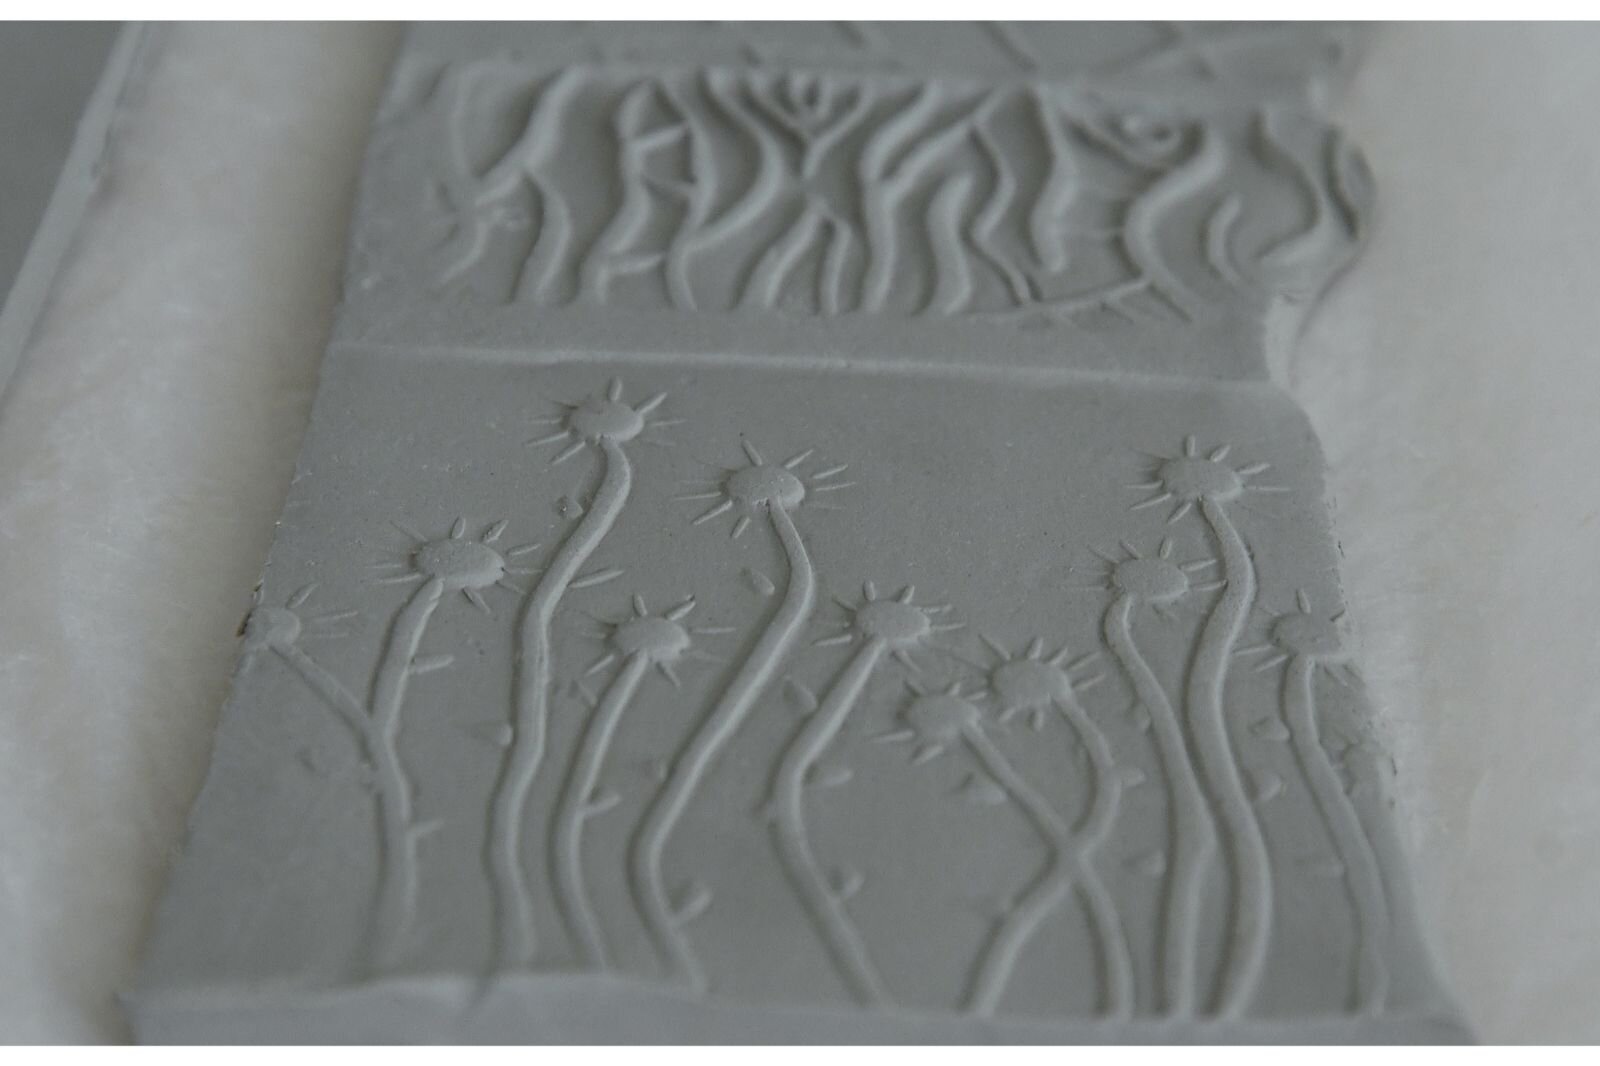 Some sample designs on clay.